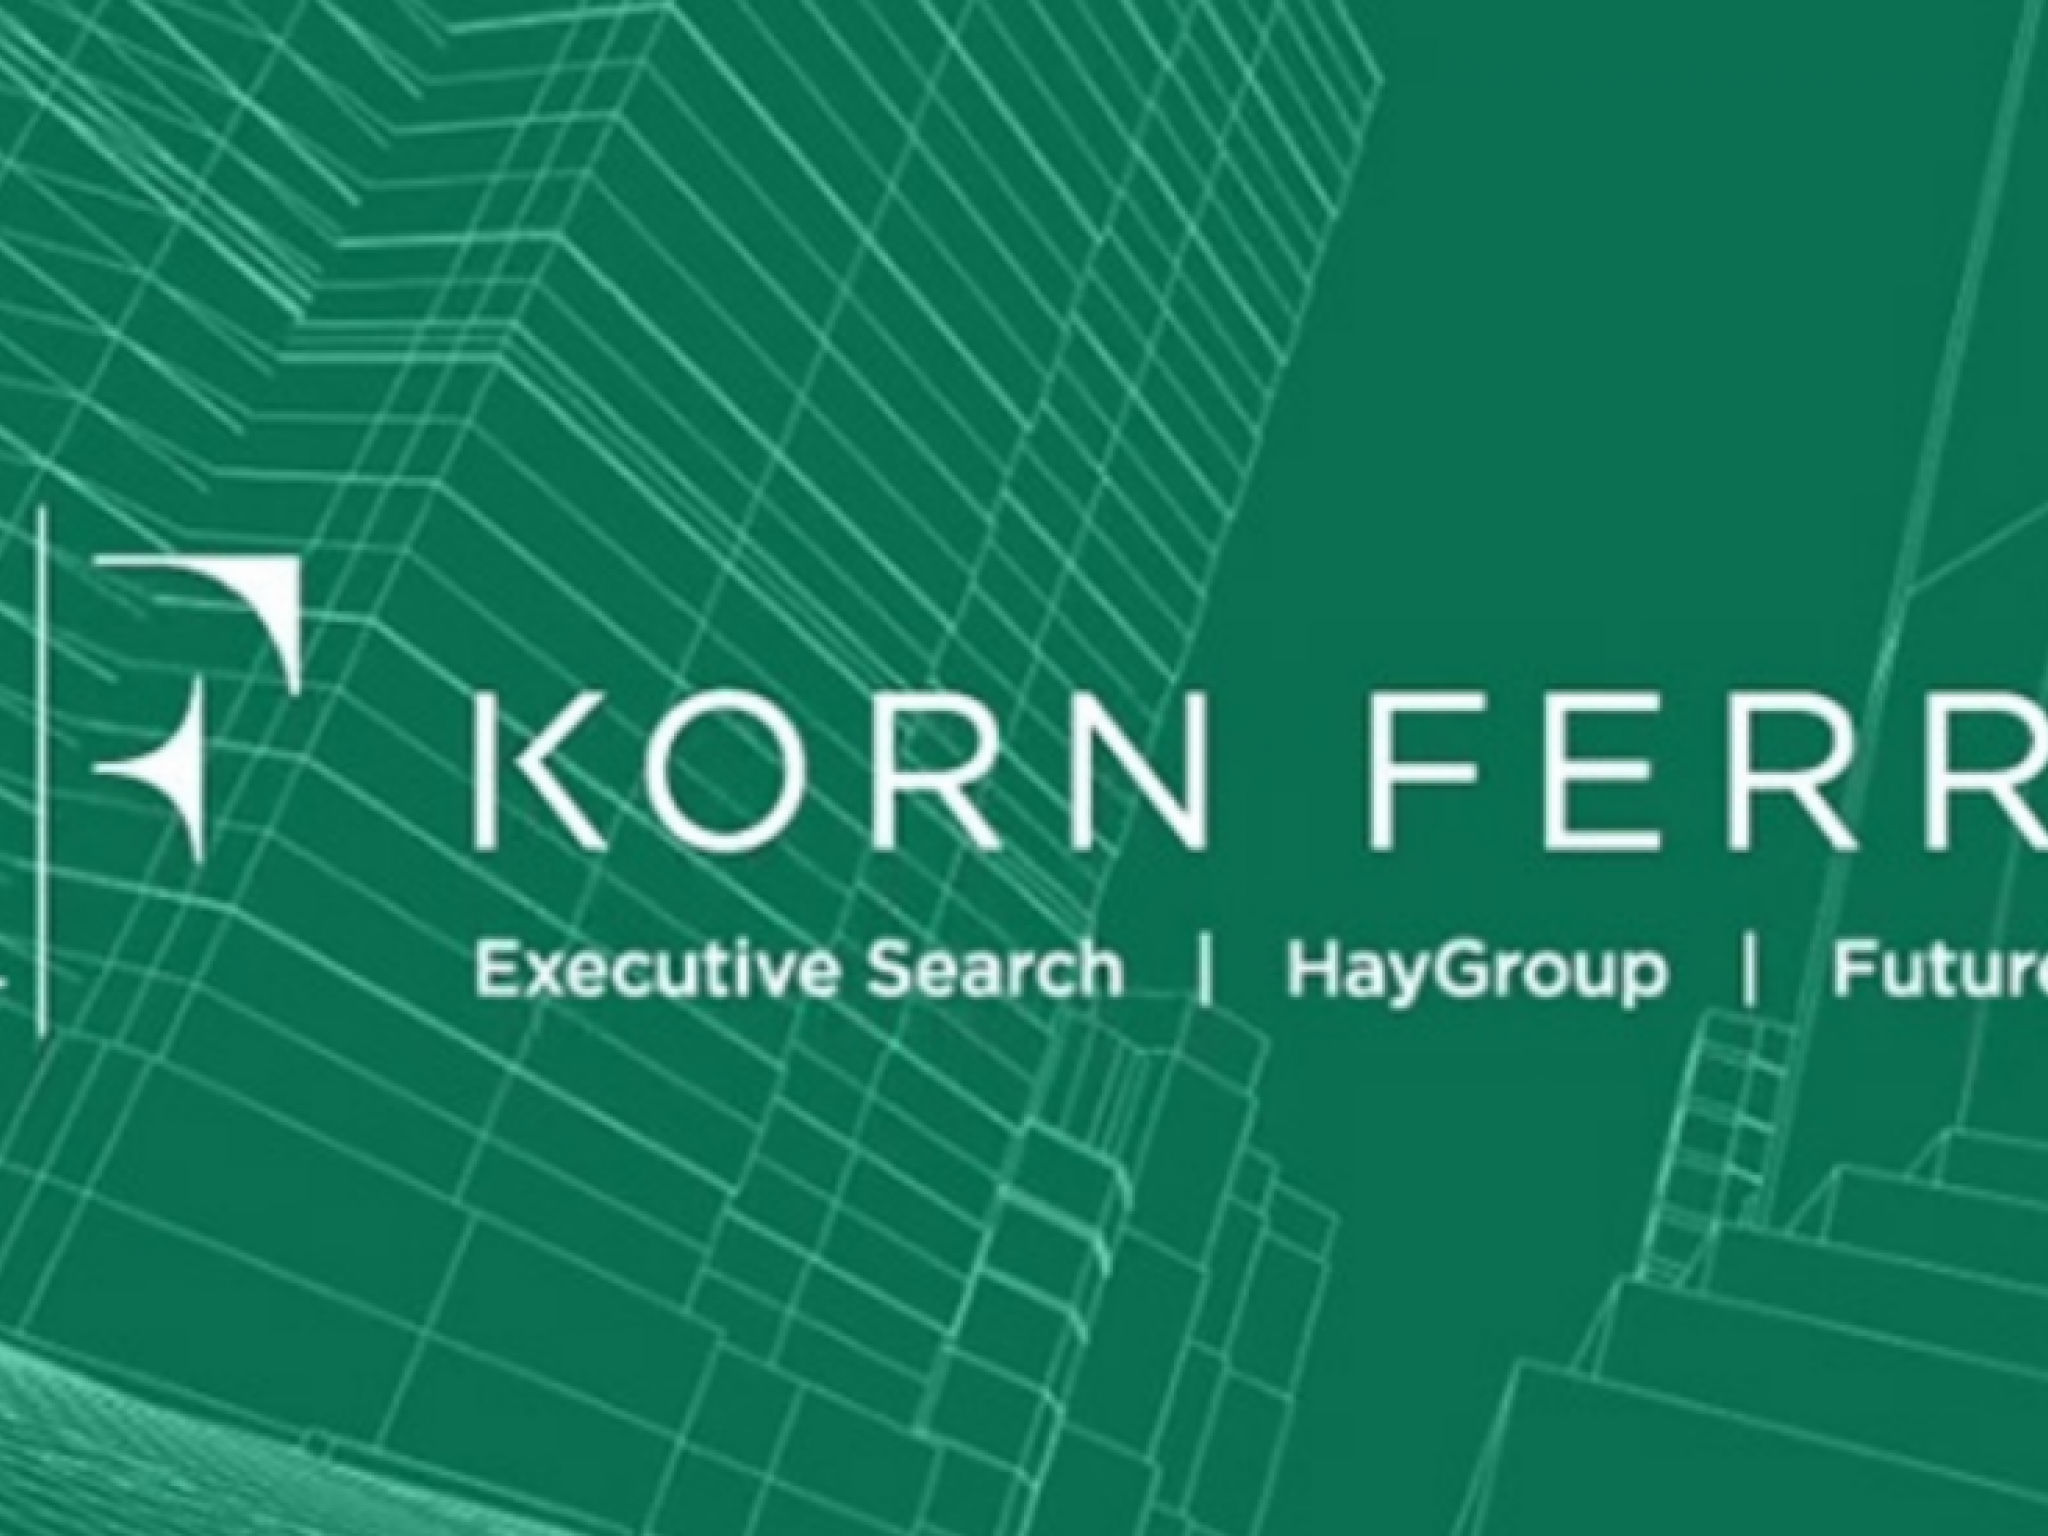  korn-ferry-consulting-firm-announces-dividend-forecasts-higher-earnings-in-q4-amid-revenue-dip 